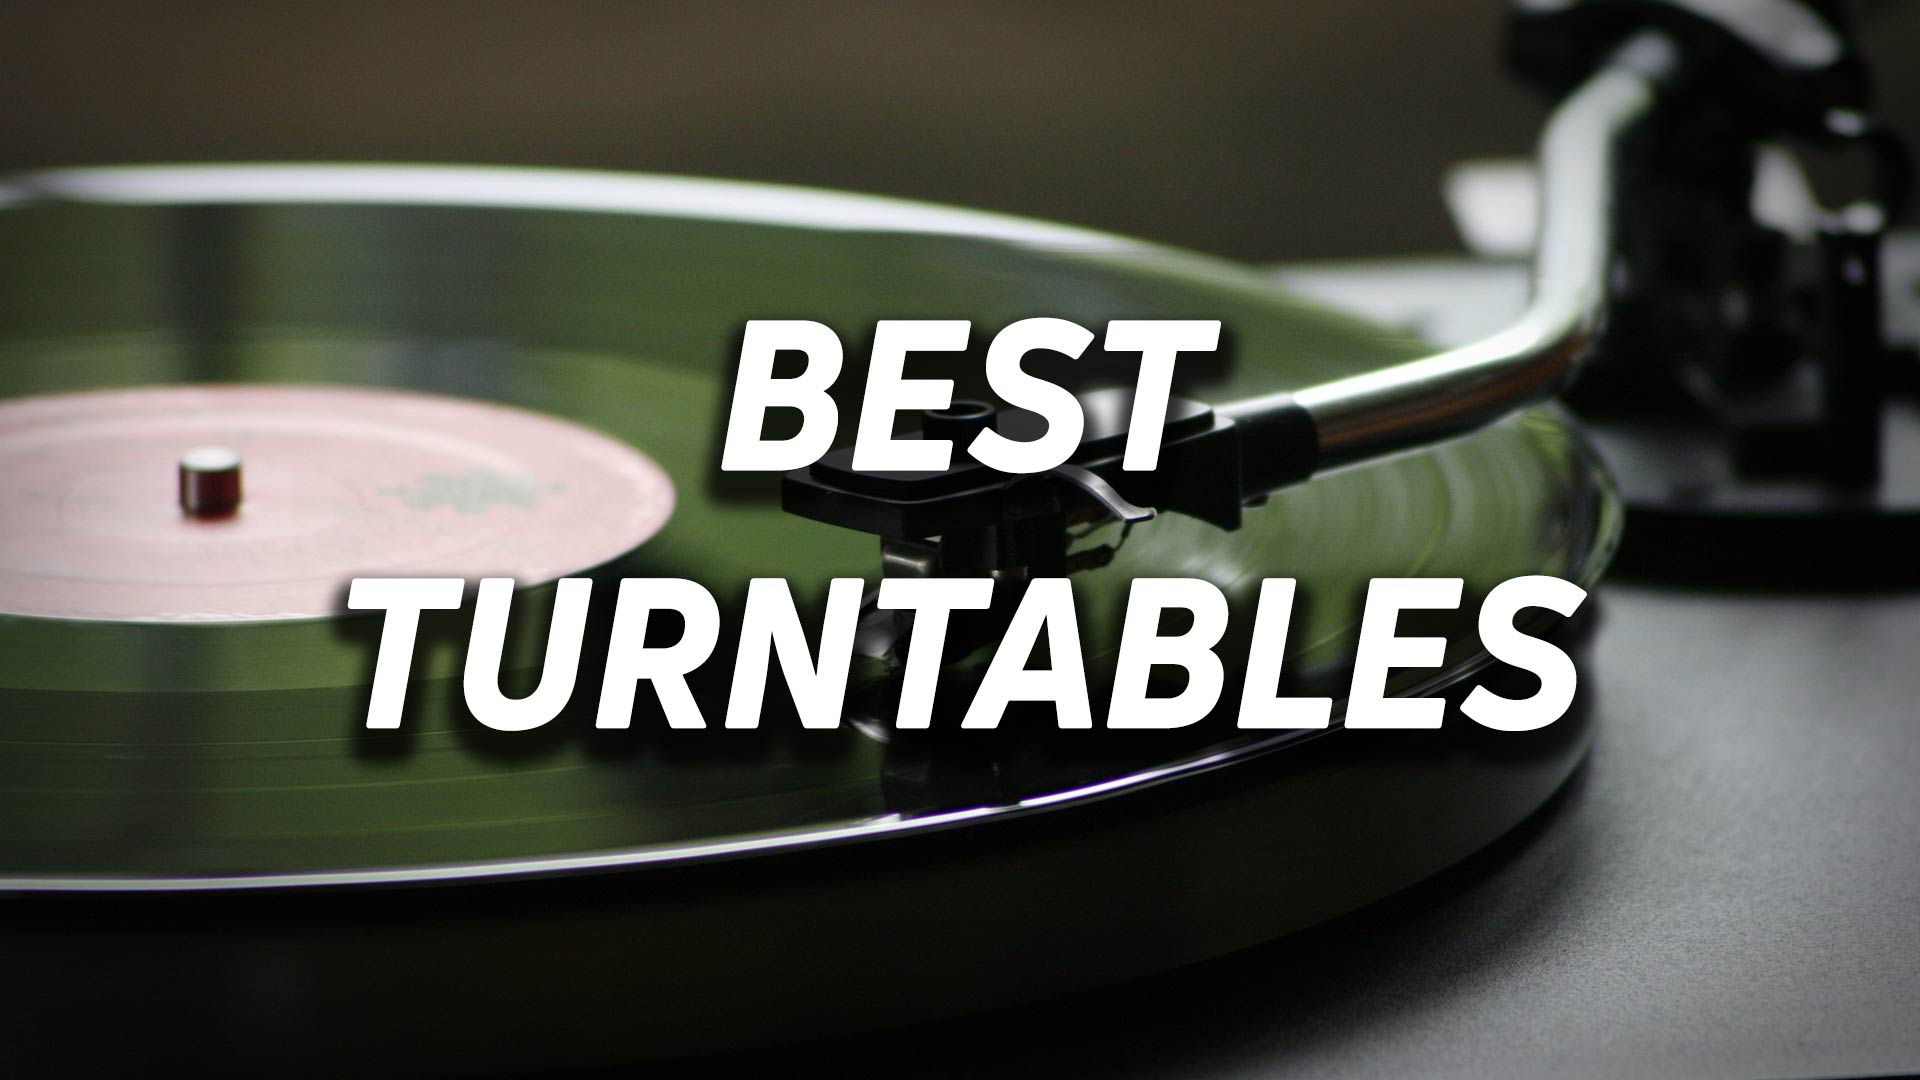 A turntable with a green vinyl record on top of it and the text "Best turntables" overlaid.